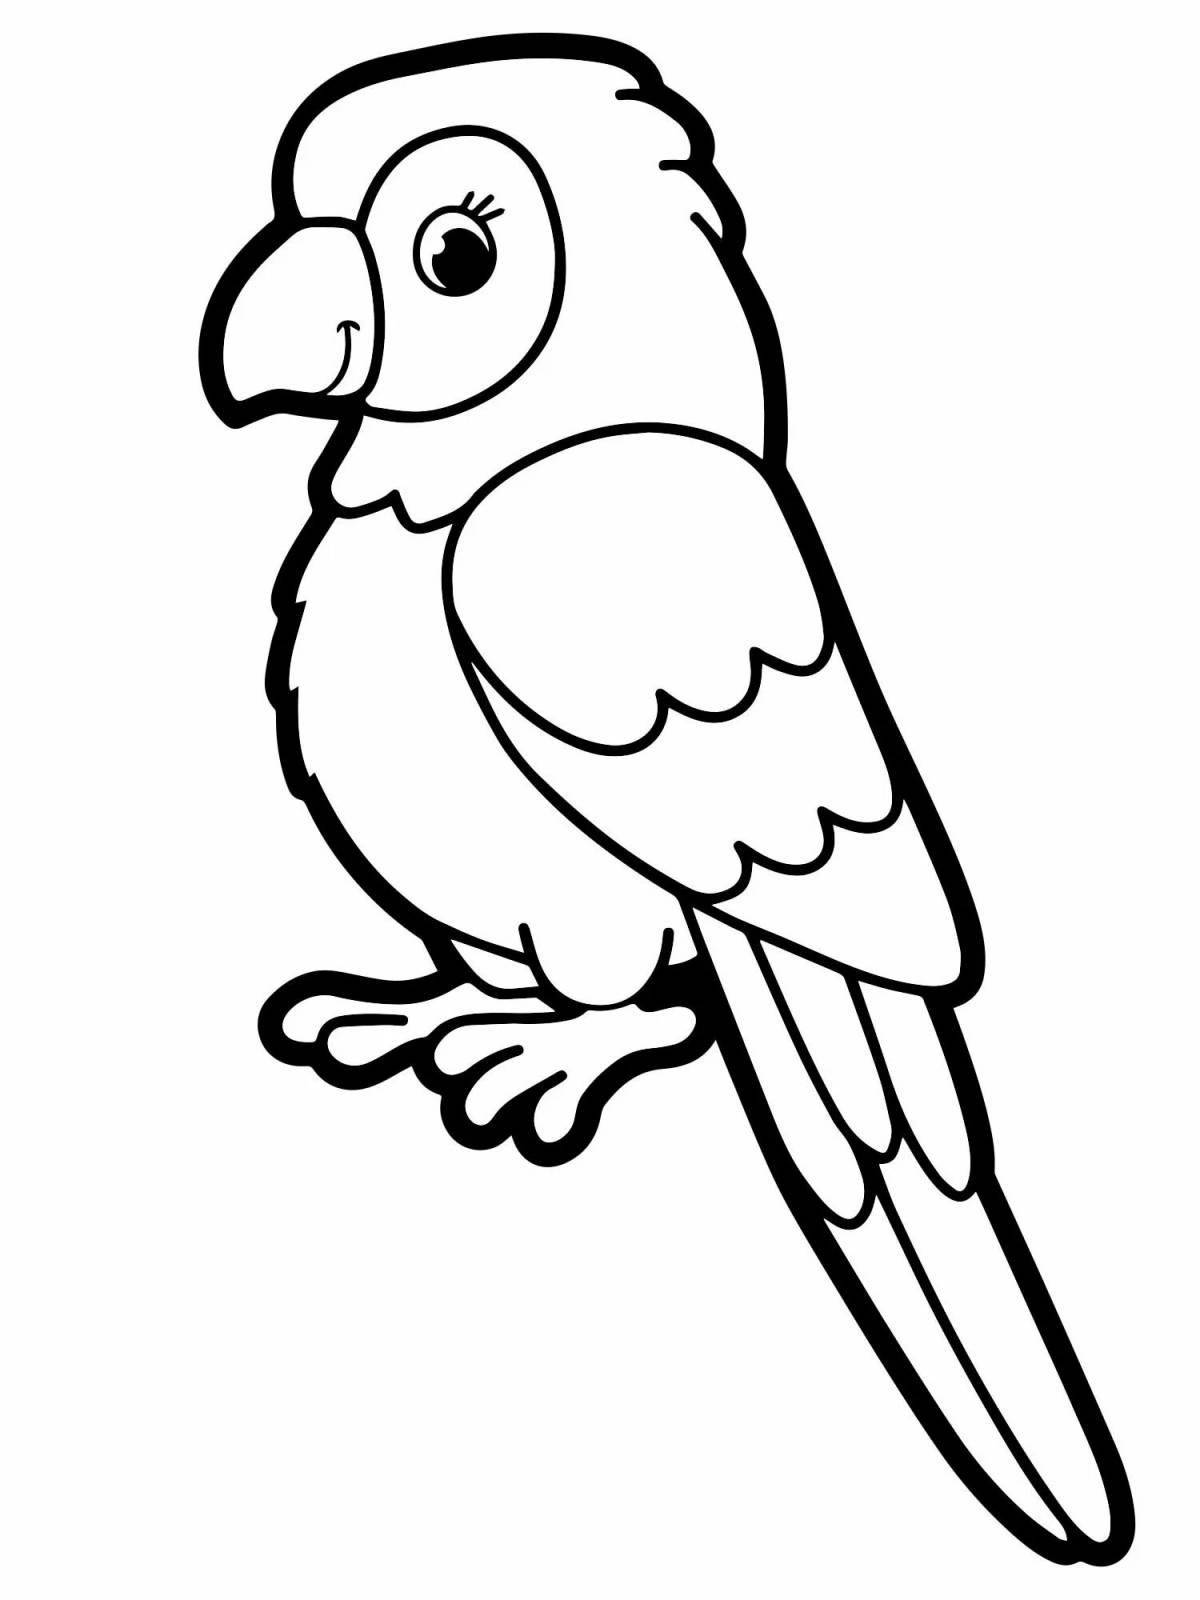 Parrot shining coloring book